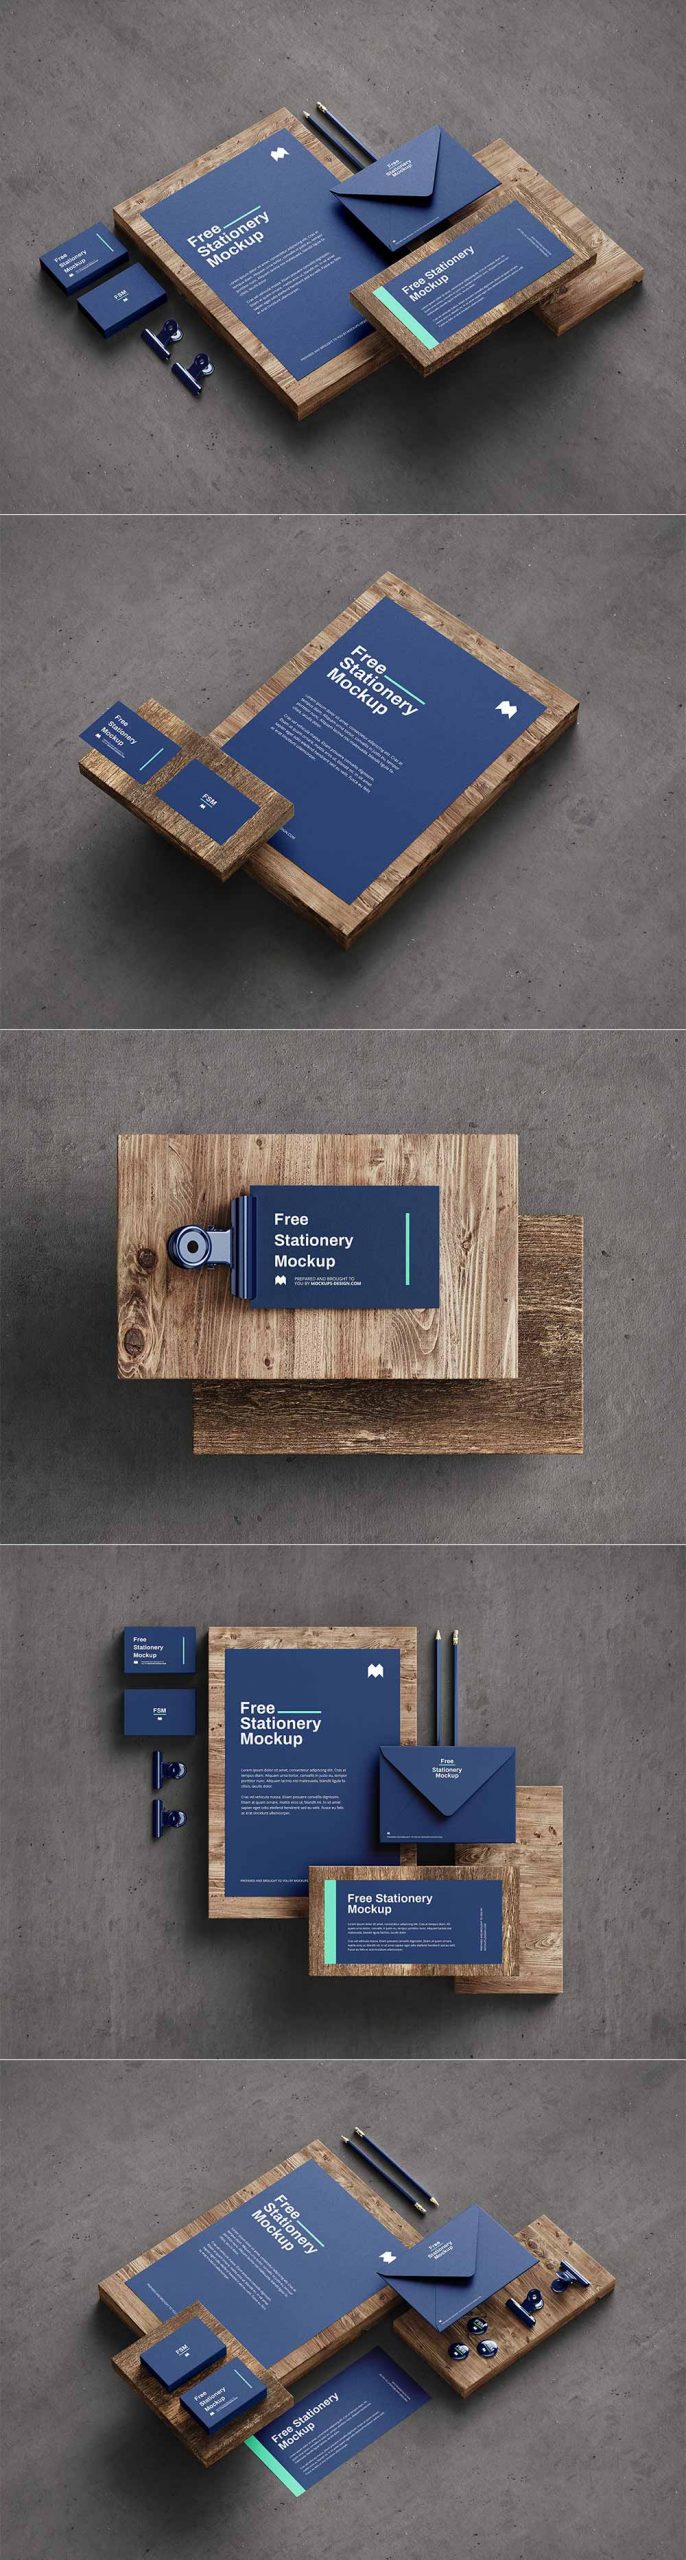 Wooden Stationery Mockup free download